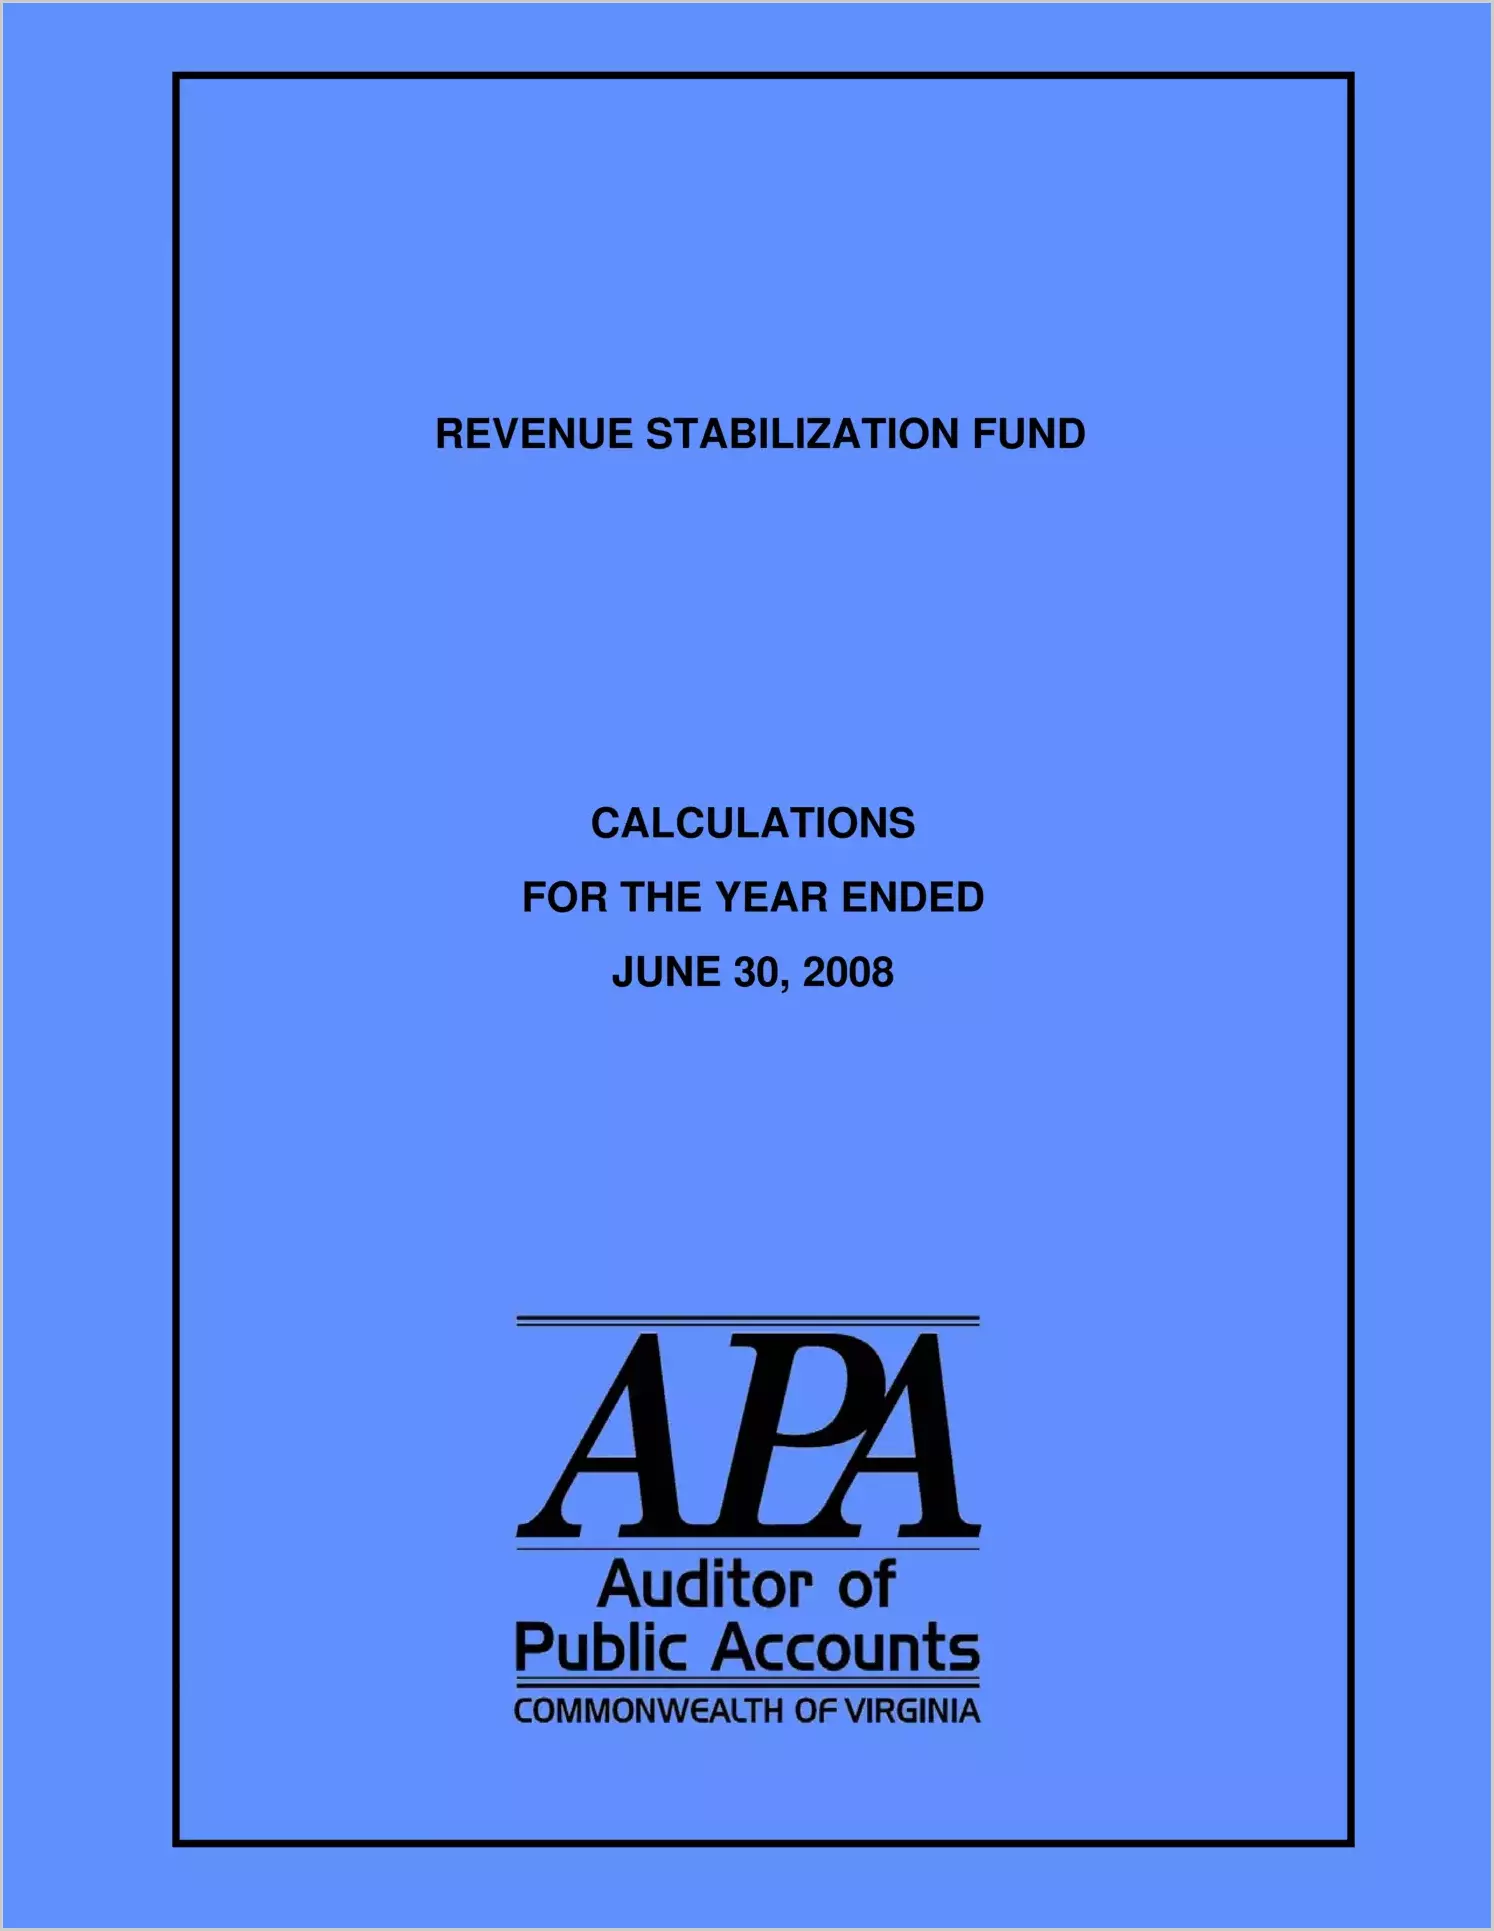 Revenue Stabilization Fund Calculations for the year ended June 30, 2008